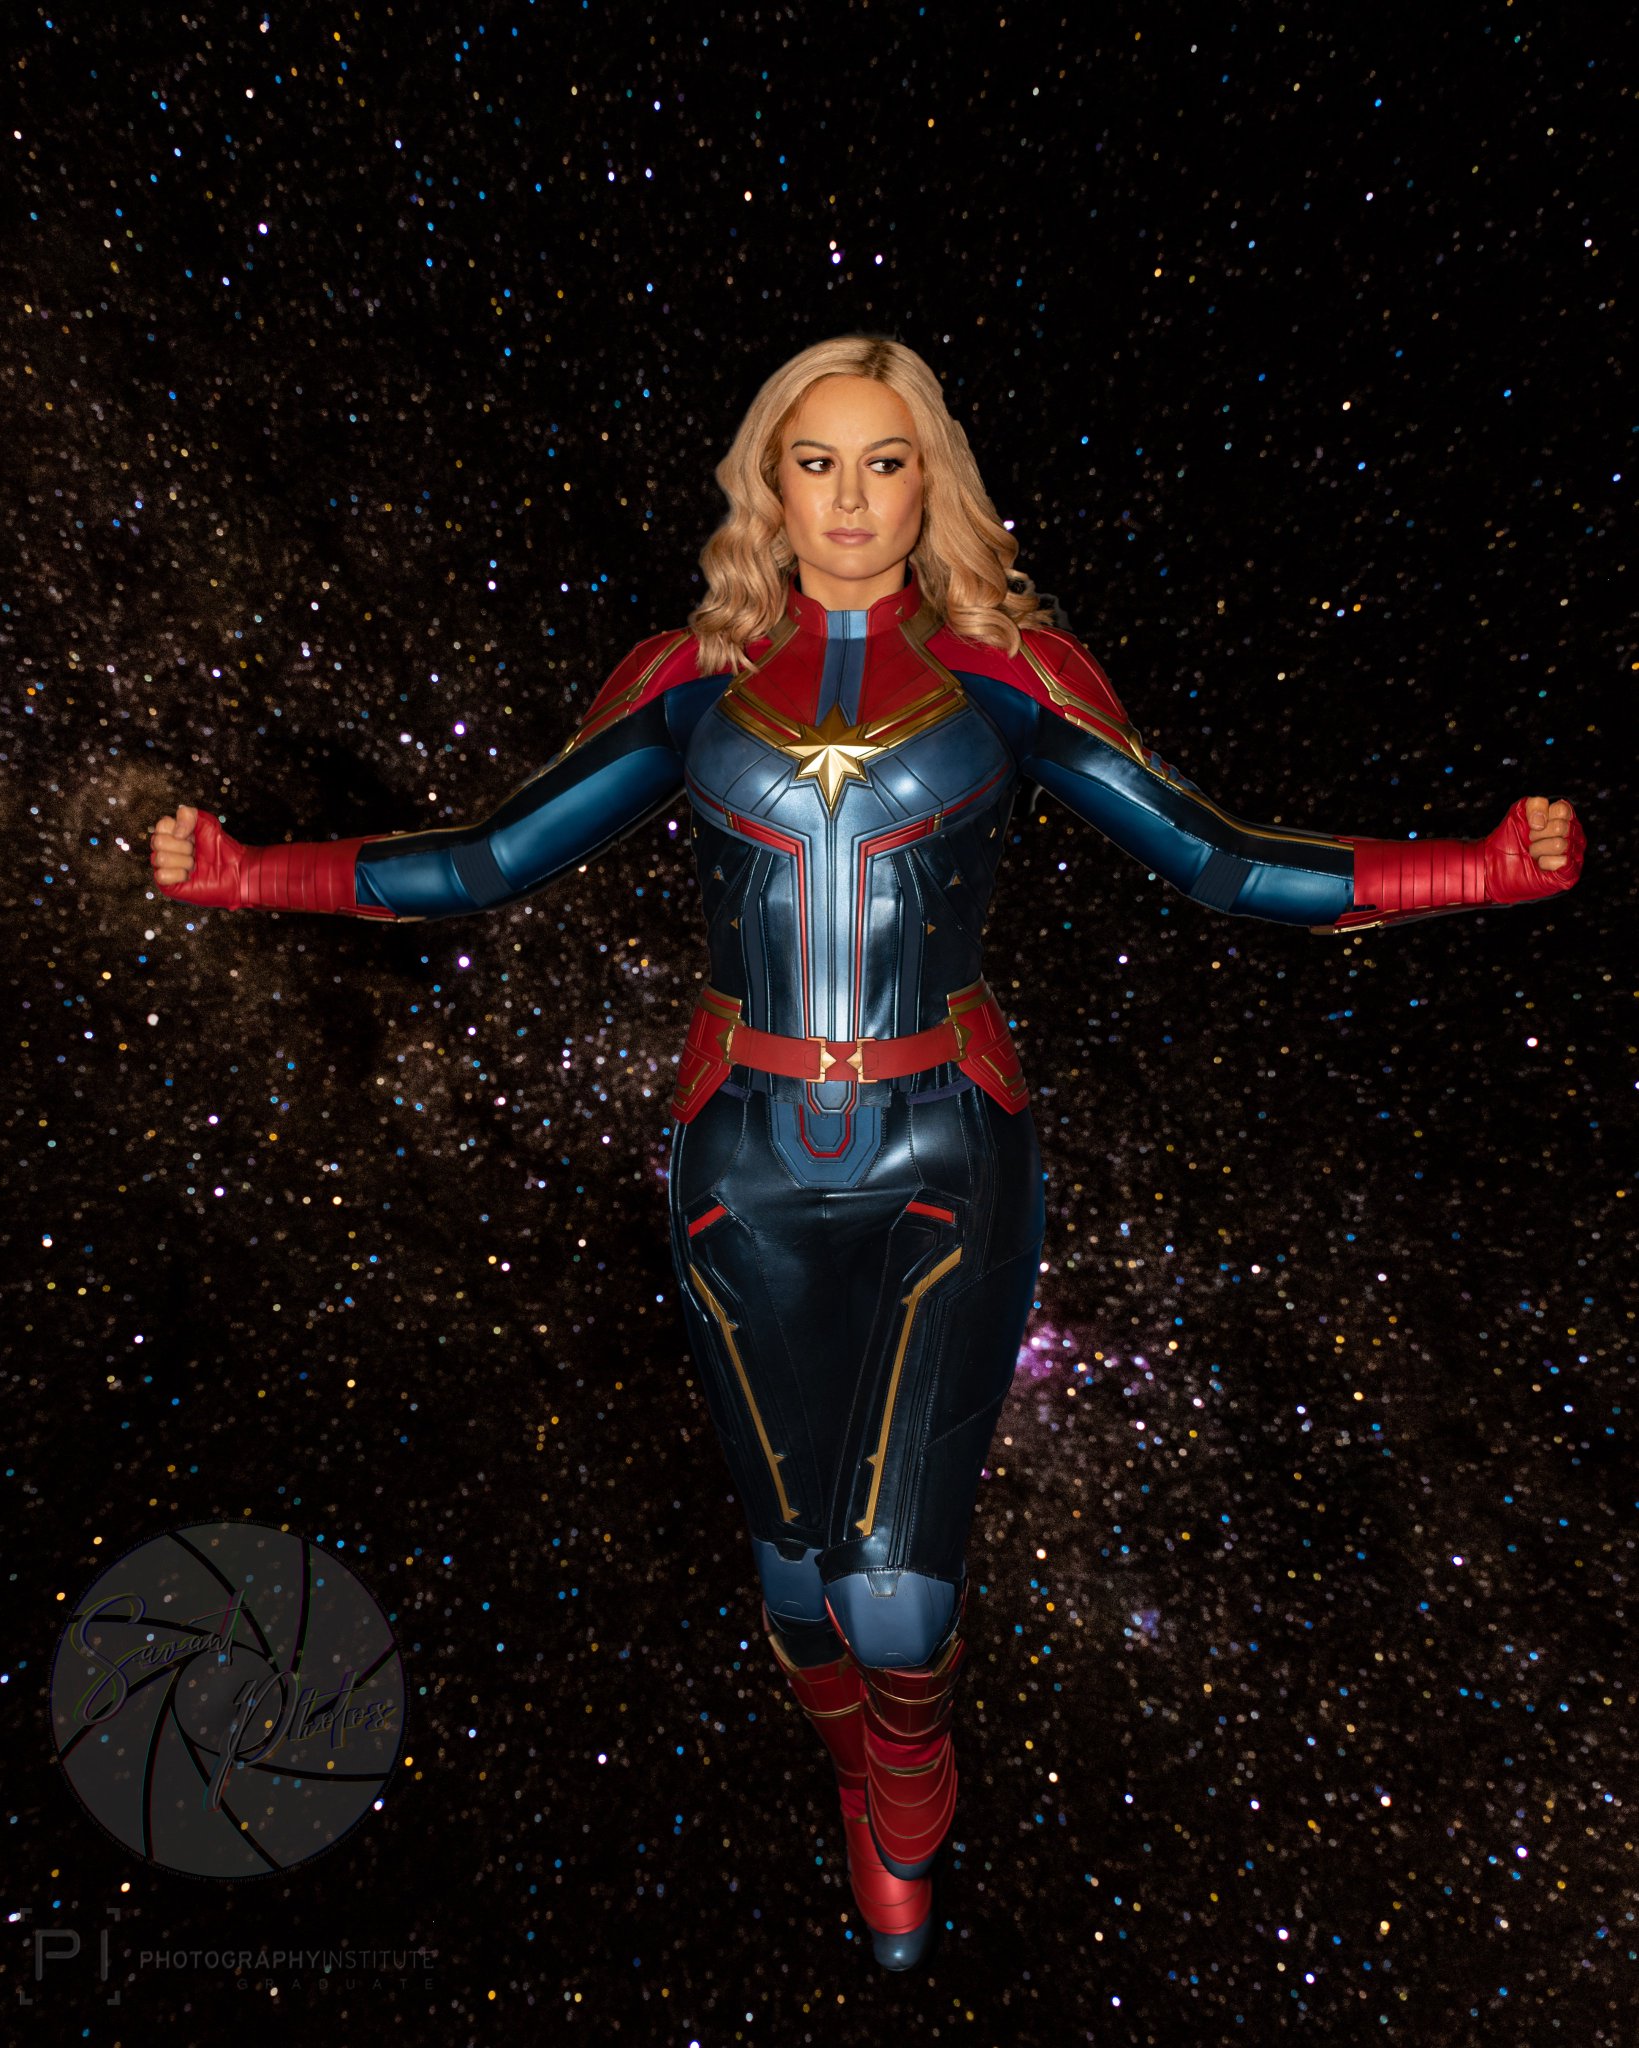 Madame Tussauds New York Welcomes Brie Larson as Captain Marvel